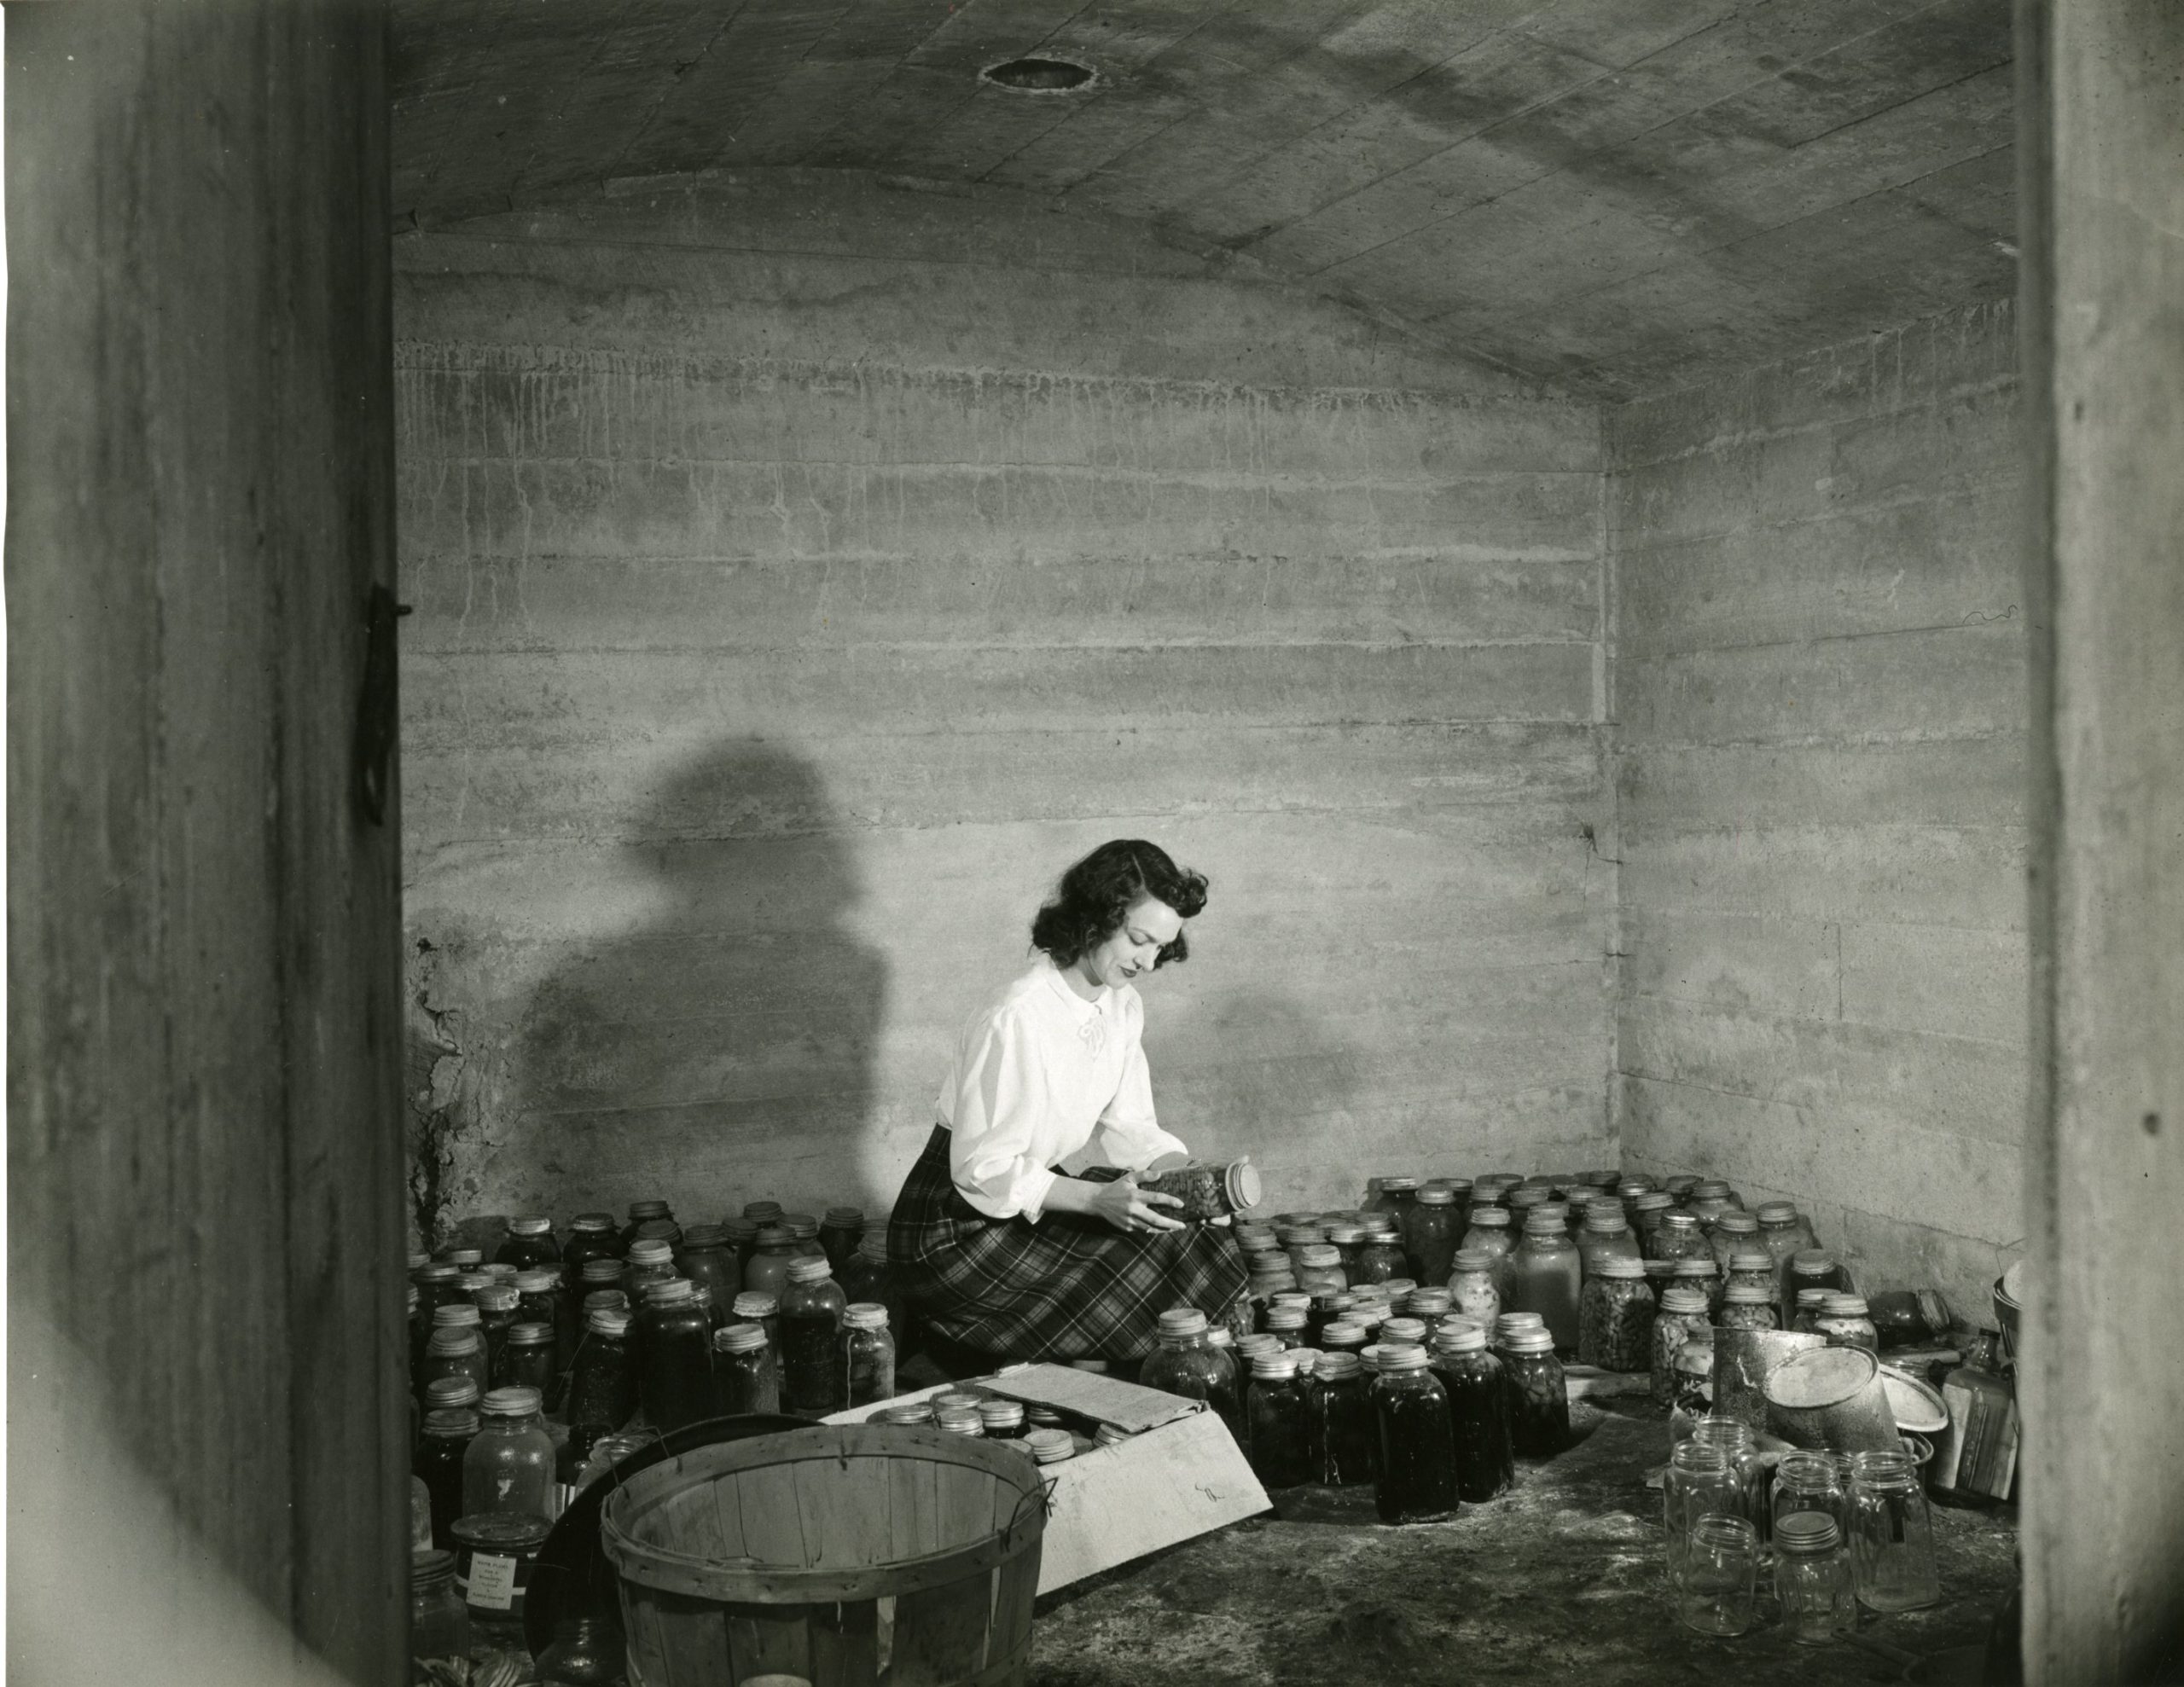 A student holding a jar in the cannery